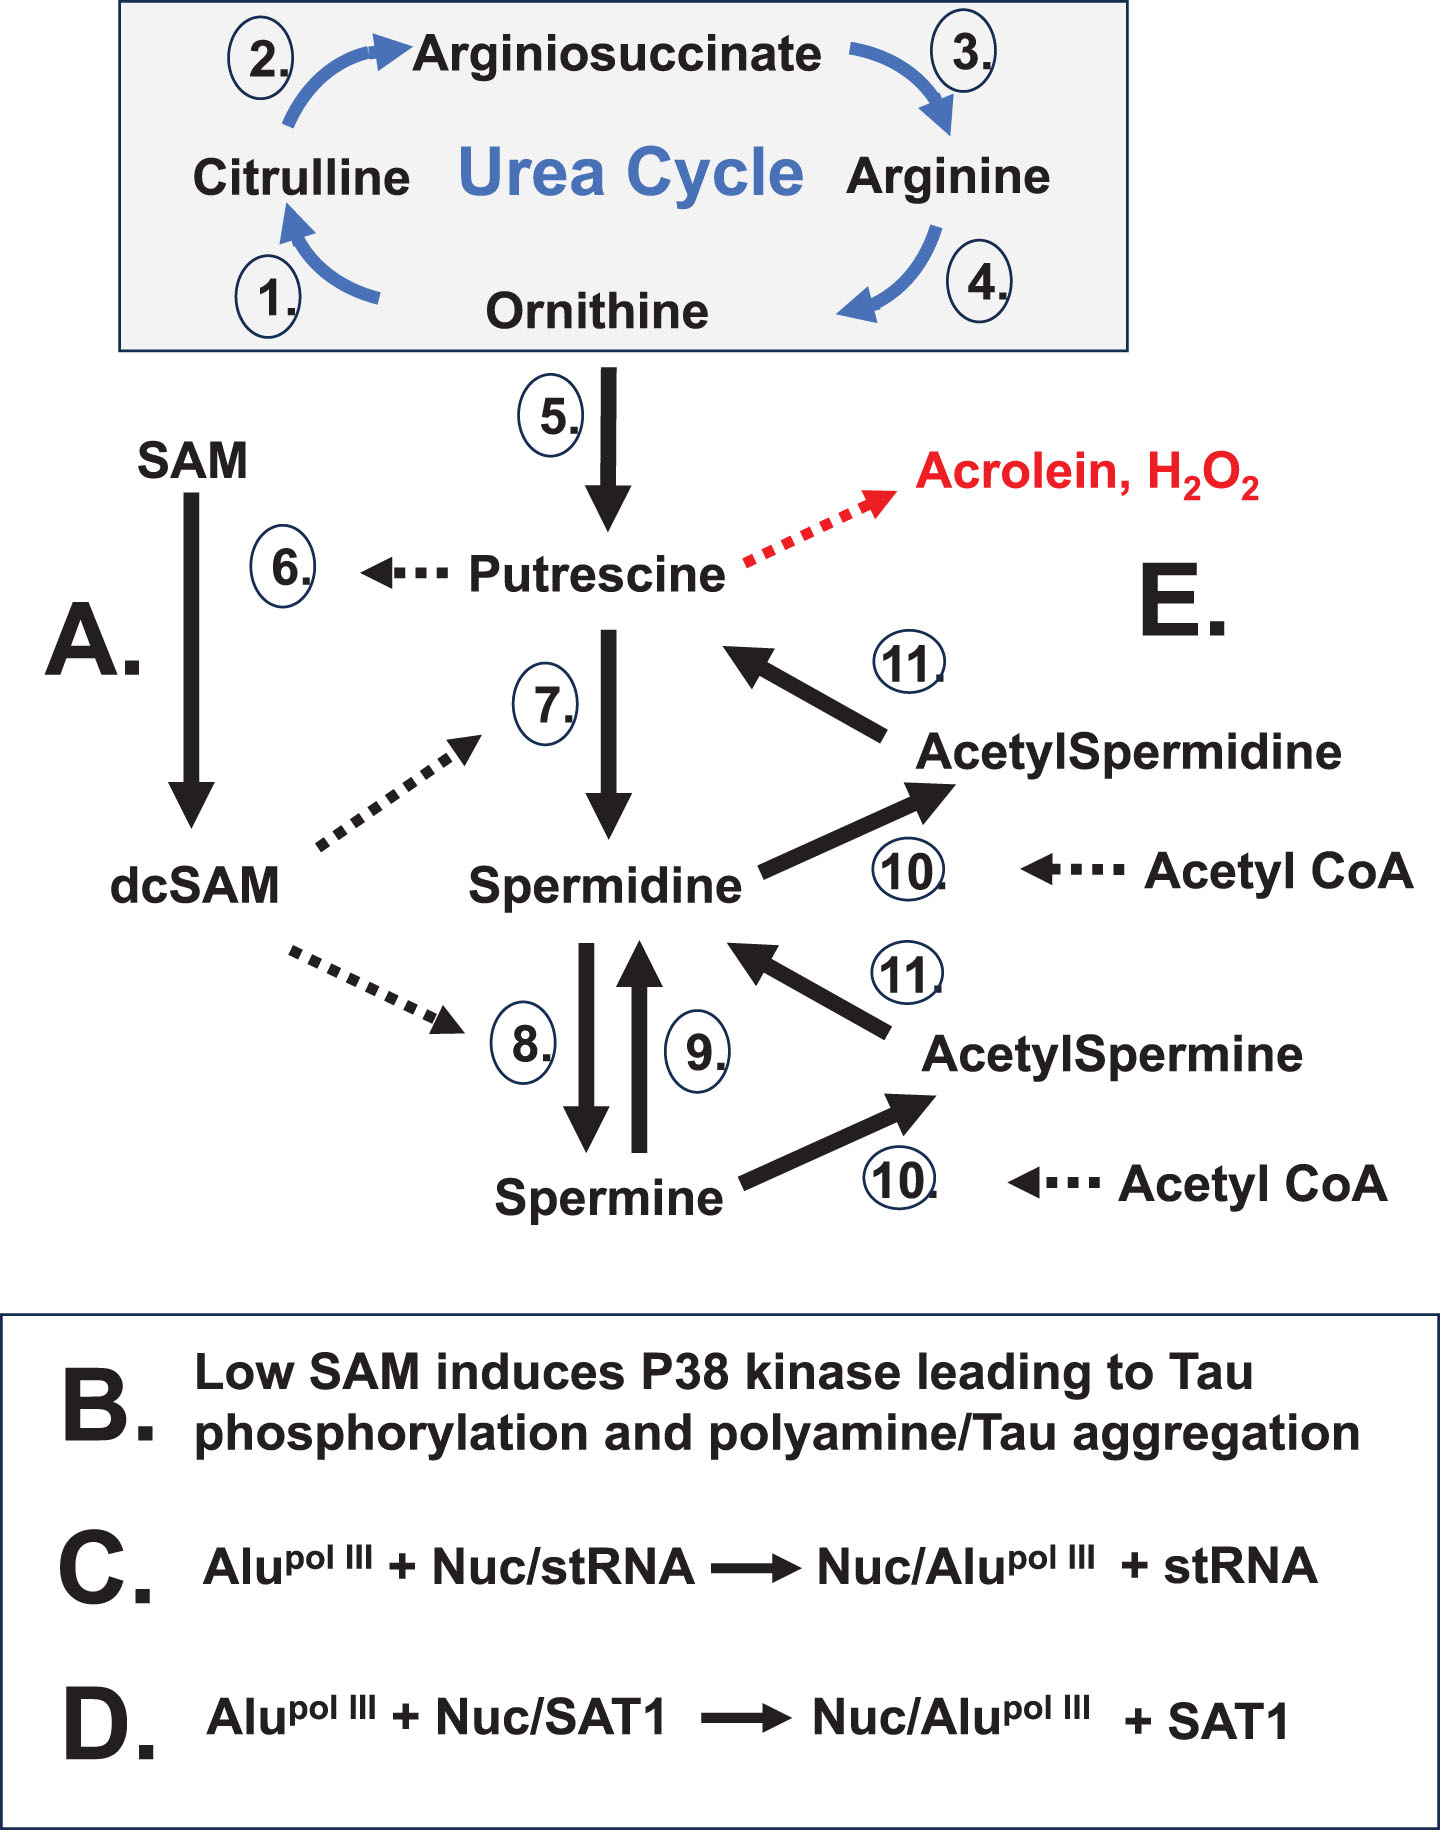 Stress Impact on Polyamines. Stress can lead to wasteful rounds of polyamine synthesis and recycling. A) Increased polyamine synthesis occurs from stress as the cell needs to increase nucleolar activity for recovery. B) Extensive polyamine synthesis reduces SAM which can trigger p38 kinase phosphorylation of tau. Subsequent abnormal release of nucleolar polyamines can aggregate phosphorylated tau. C) “Free” Alu transcribed by RNA pol III can compete with structural RNAs (stRNA) bound to nucleolin. This weakens the nucleolar heterochromatic shell. D) “Free” Alu transcripts can also compete nucleolin off sequestered SAT1 transcripts. The SAT1 protein can cause super induction of polyamine recycling that draws down acetyl-CoA, impacting acetylcholine levels, and creates putrescine which induces further polyamine synthesis. Also, there is potential creation of cytotoxic acrolein and hydrogen peroxide. Polyamine recycling by acetylation and oxidation works to reestablish polyamine levels as the cell recovers from stress. Enzymes:1. Ornithine Transcarbamylase (OTC);2. Argininosuccinate Synthetase 1 (ASS1); 3. Argininosuccinate Lyase (ASL);4. Arginase 1 (ARG1);5. Ornithine Decarboxylase (ODC); 6. S-Adenosylmethionine Decarboxylase 1 (AMD1);7. Spermidine Synthase (SRM); 8. Spermine Synthase (SMS);9. Spermine Oxidase (SMOX);10. Spermidine/Spermine N1 Acetyltransferase 1 (SAT1);11. Polyamine Oxidase (PAO).